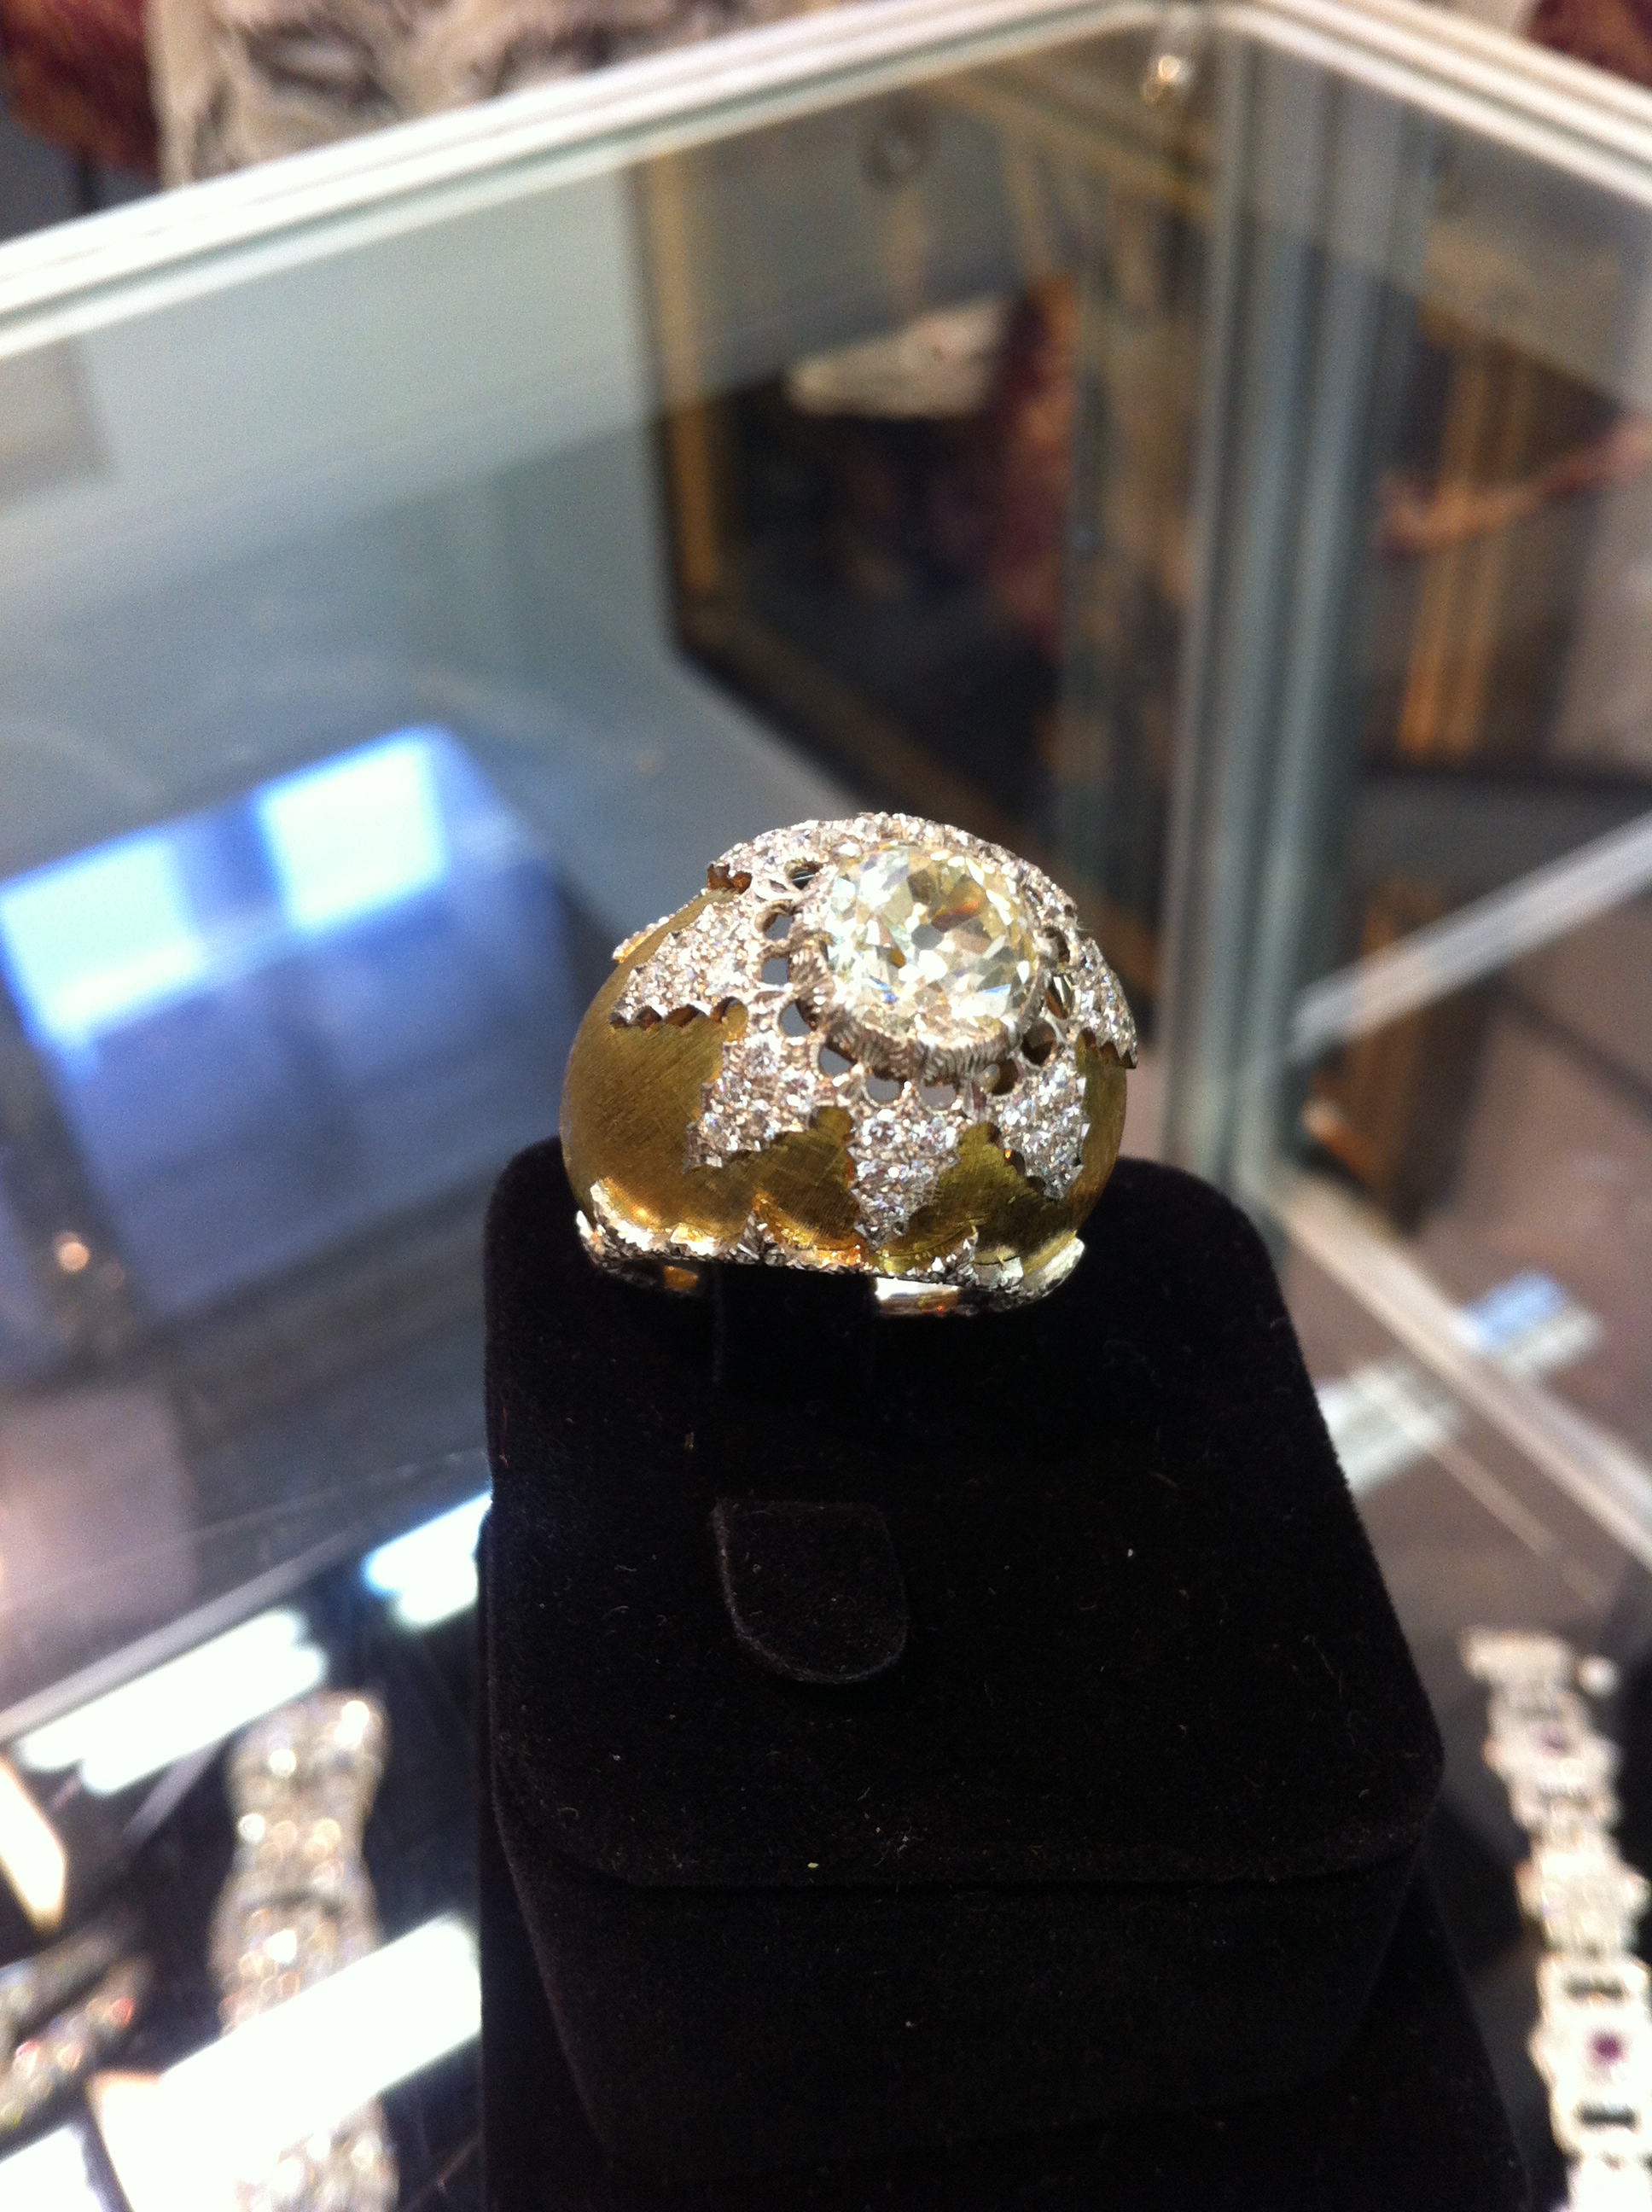 This wonderful ring features two of the trademark Buccellati techniques: the satin-like gold “Florentine” finish, and the two-tone gold diamond set lattice design, 1960s, Mario Buccellati